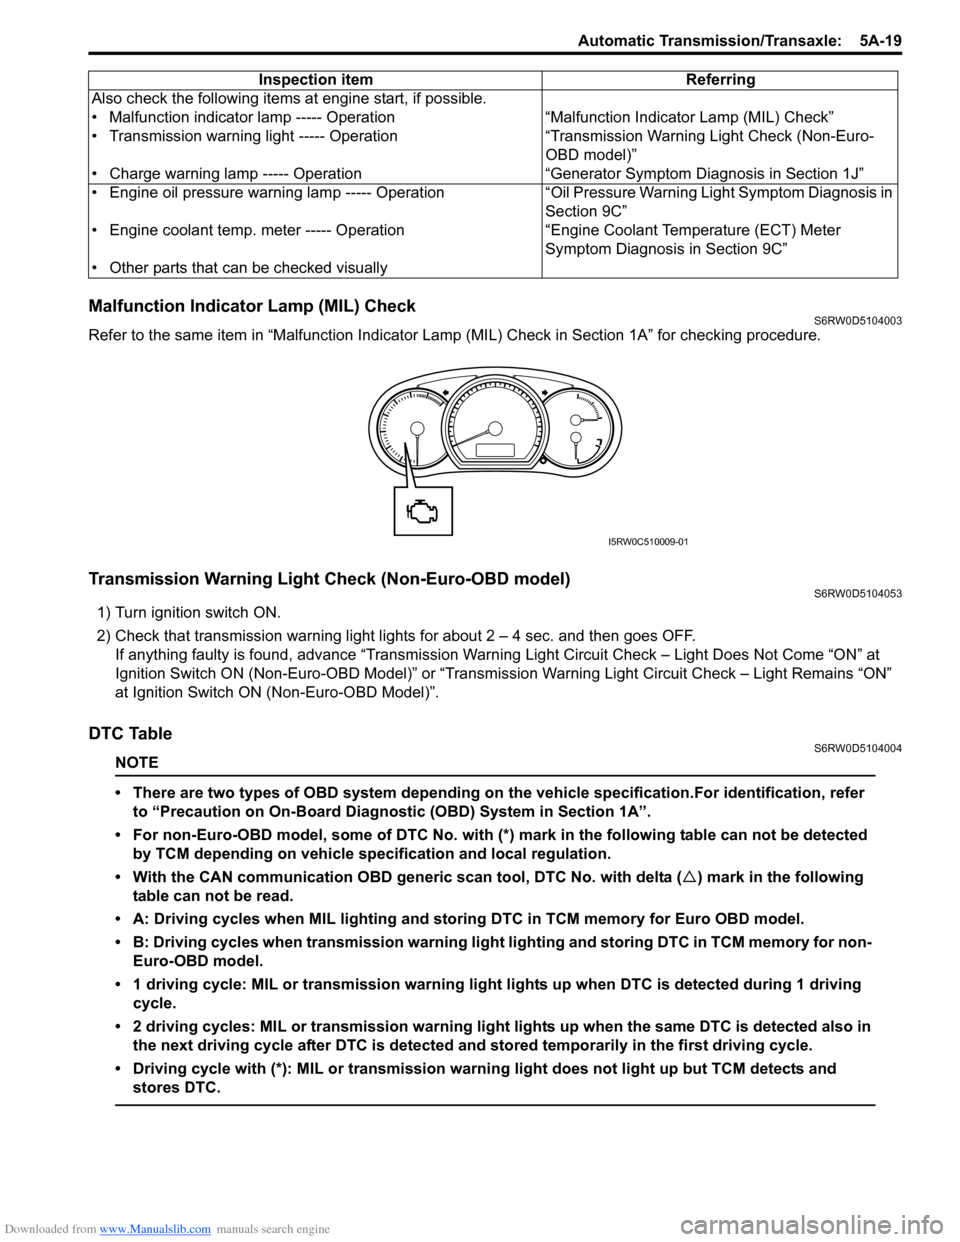 SUZUKI SX4 2006 1.G Service Workshop Manual Downloaded from www.Manualslib.com manuals search engine Automatic Transmission/Transaxle:  5A-19
Malfunction Indicator Lamp (MIL) CheckS6RW0D5104003
Refer to the same item in “Malfunction Indicator